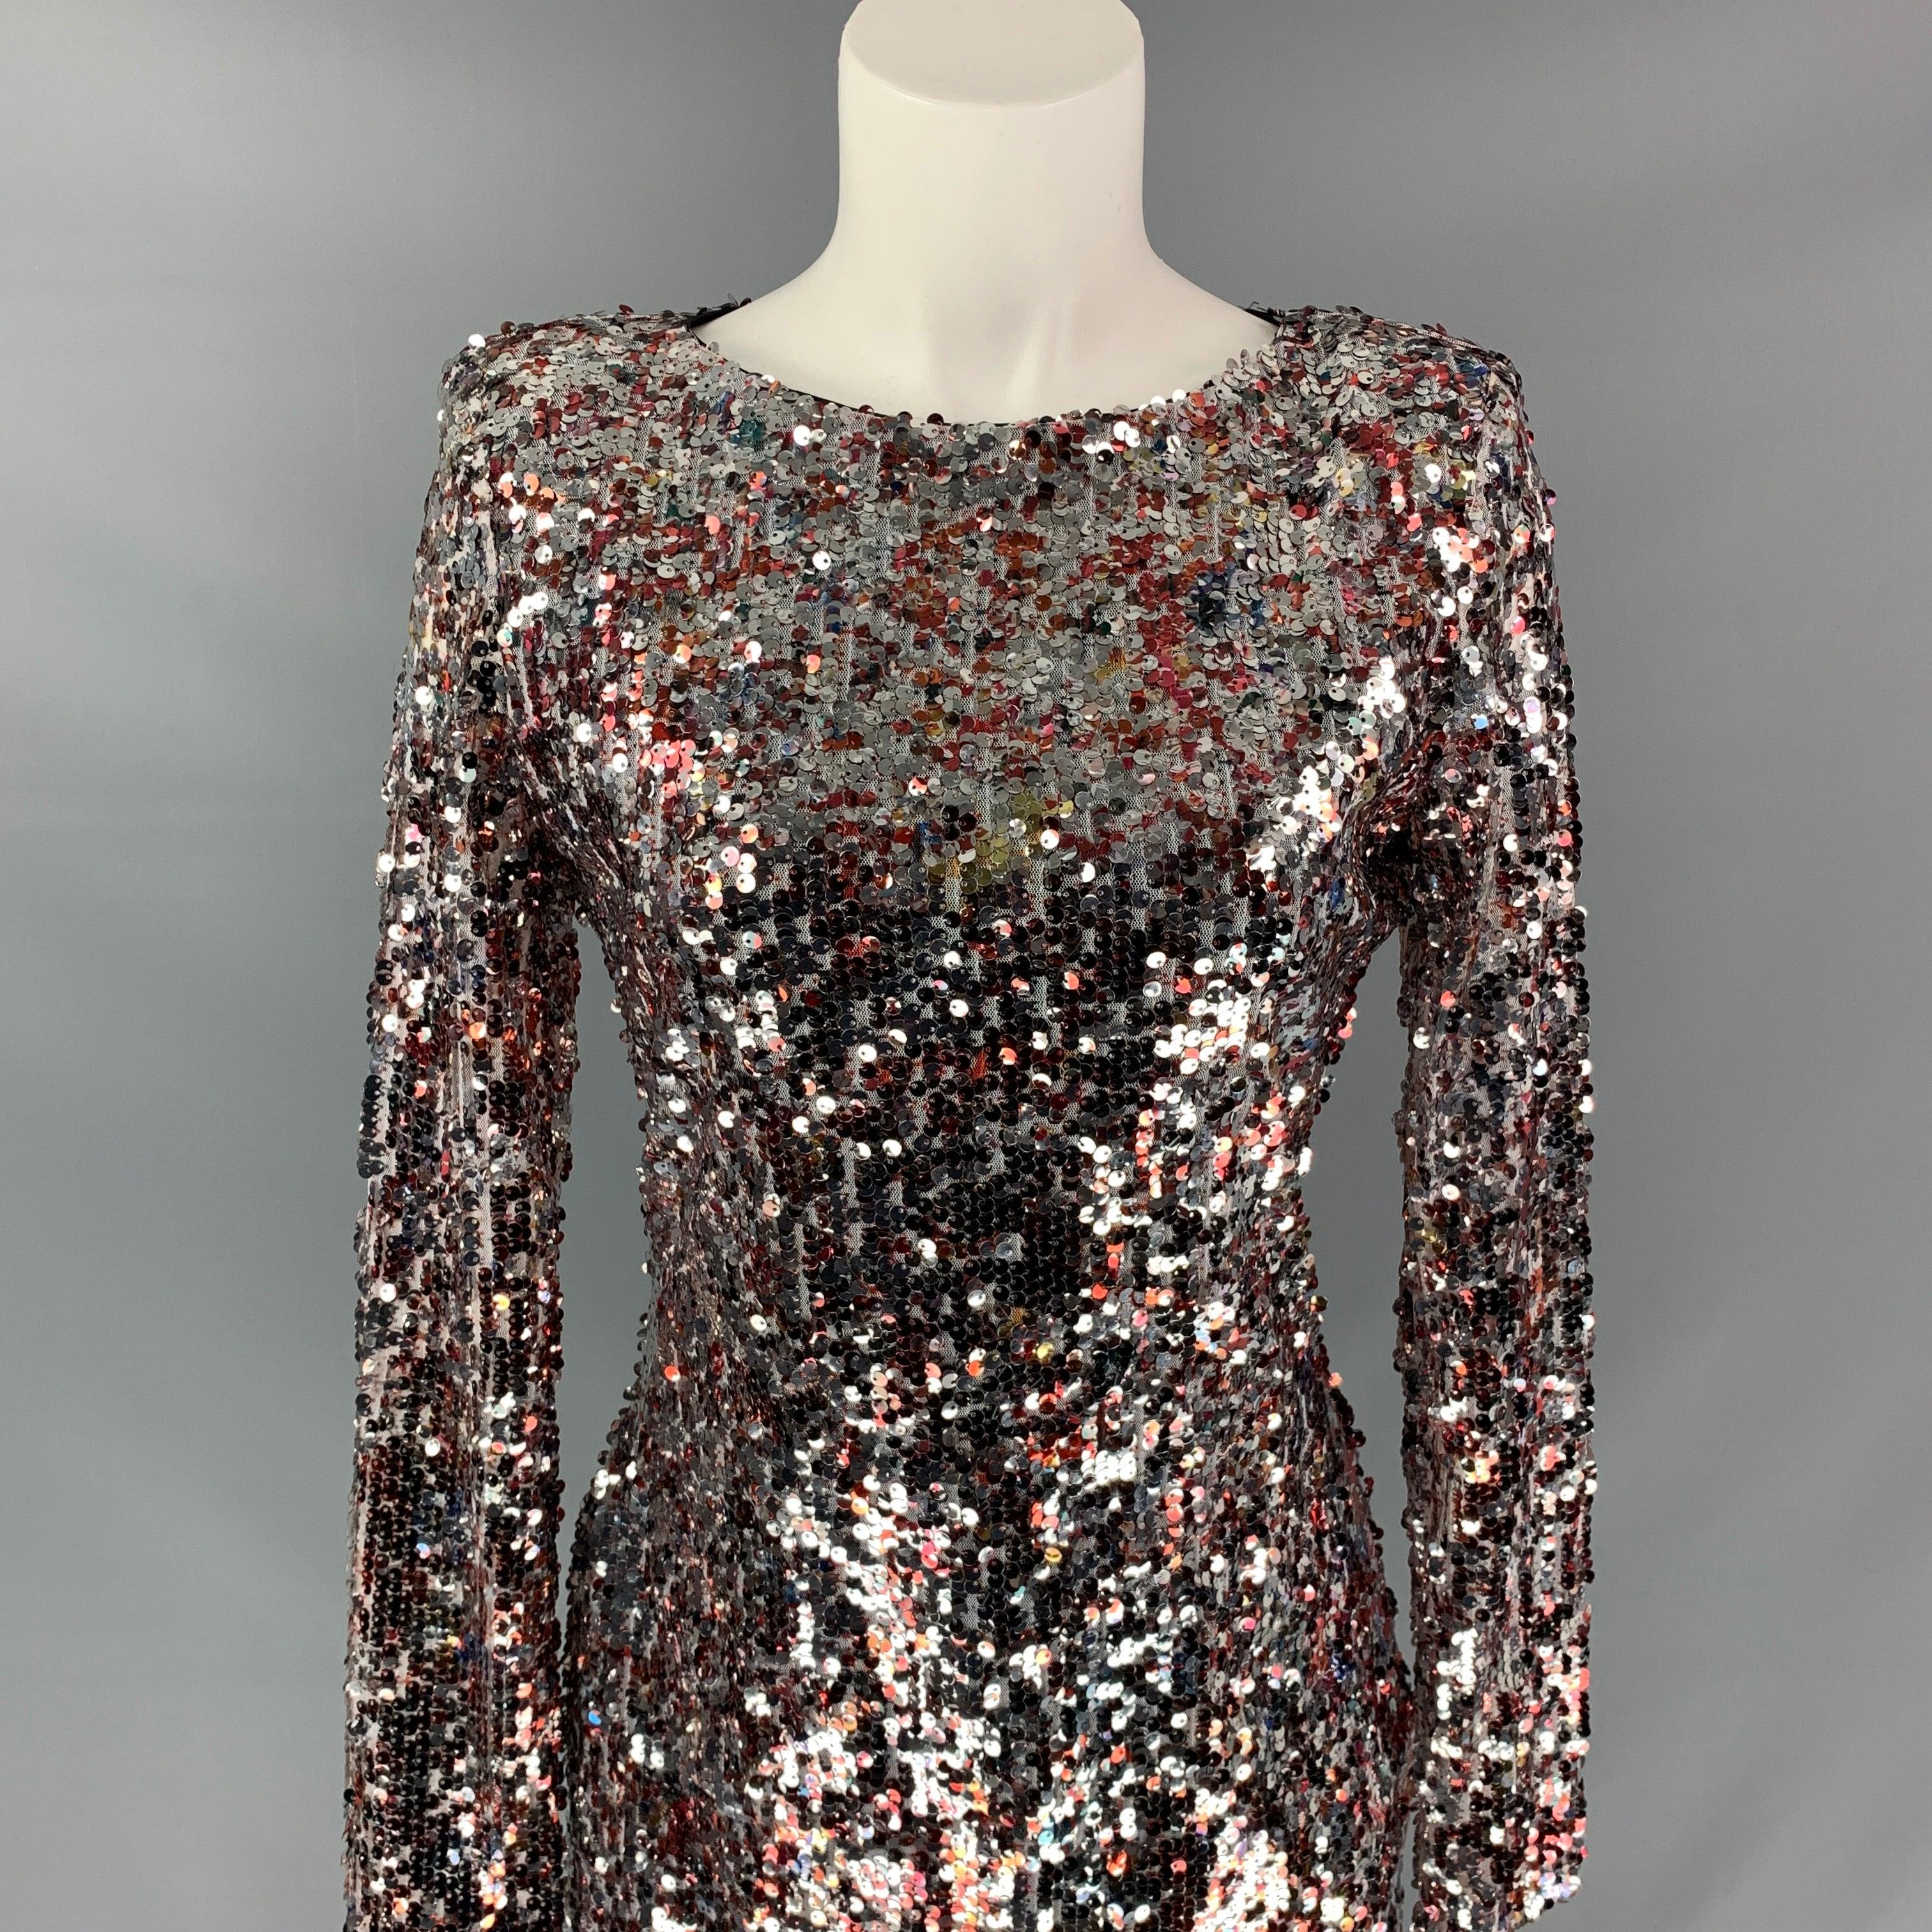 BADGLEY MISCHKA by Mark and James dress comes in a silver & burgundy sequined material featuring a mini style, a-line, long sleeves, and a back zipper closure.
Very Good
Pre-Owned Condition. 

Marked:   M 

Measurements: 
 
Shoulder: 15 inches 